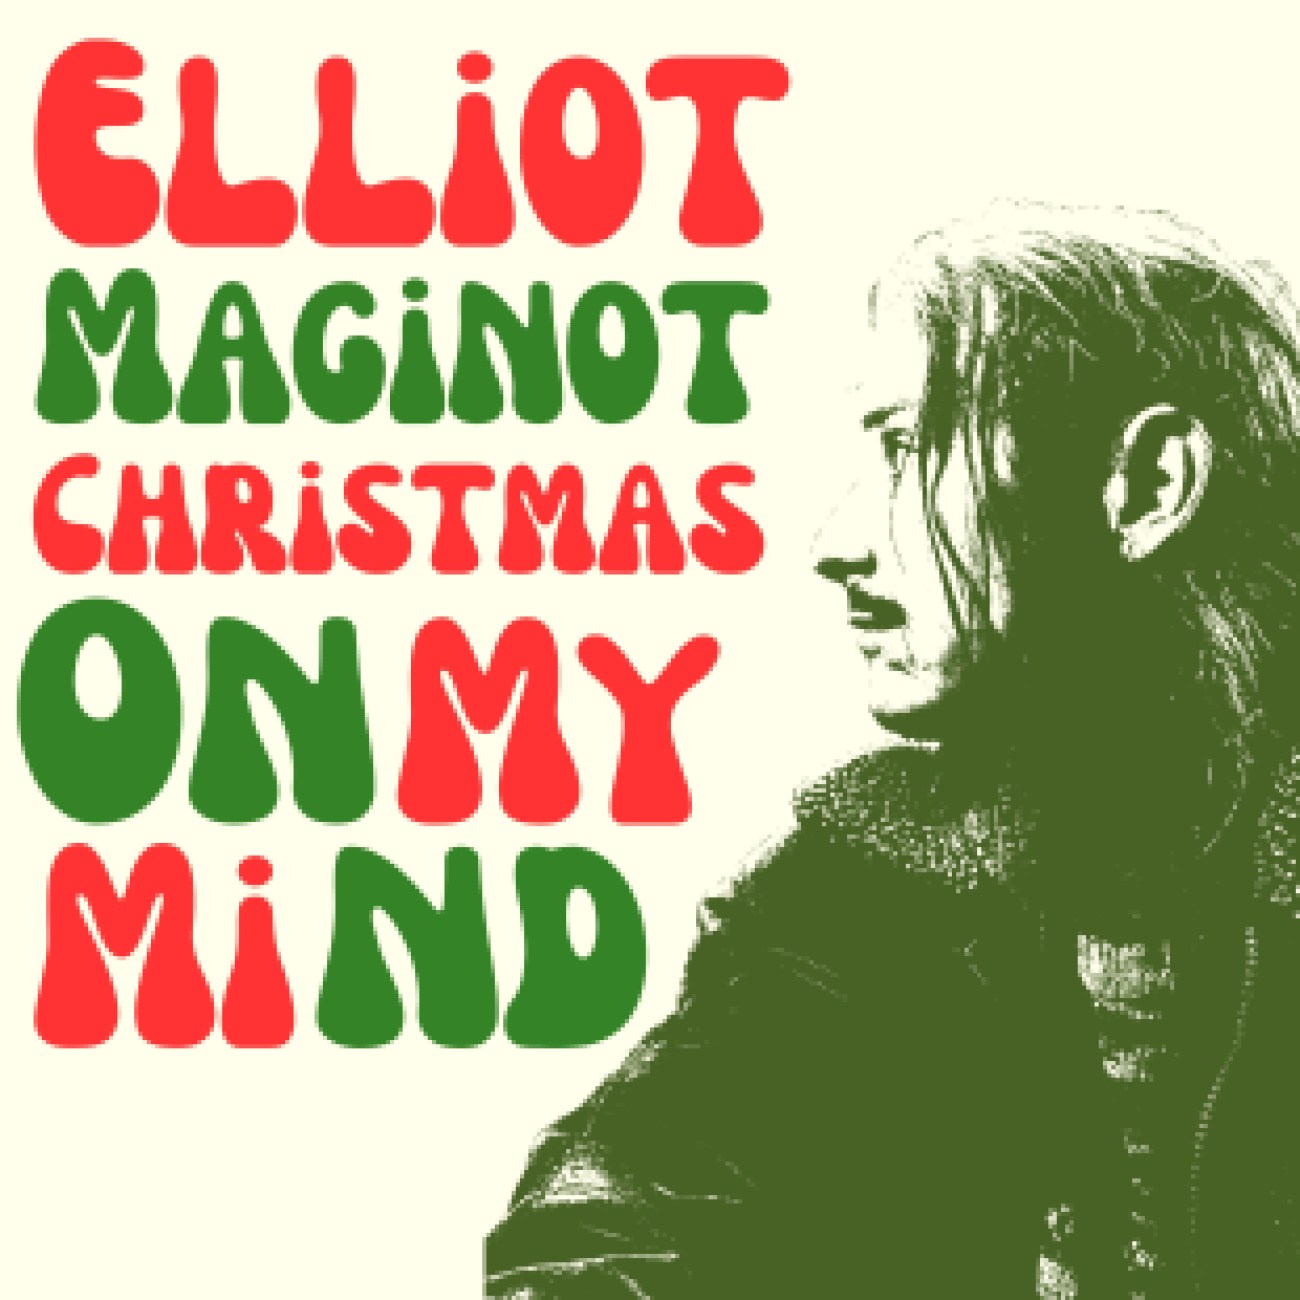 Chanson « Christmas on My Mind » d’Elliot Maginot. Image : Les Disques Audiogramme